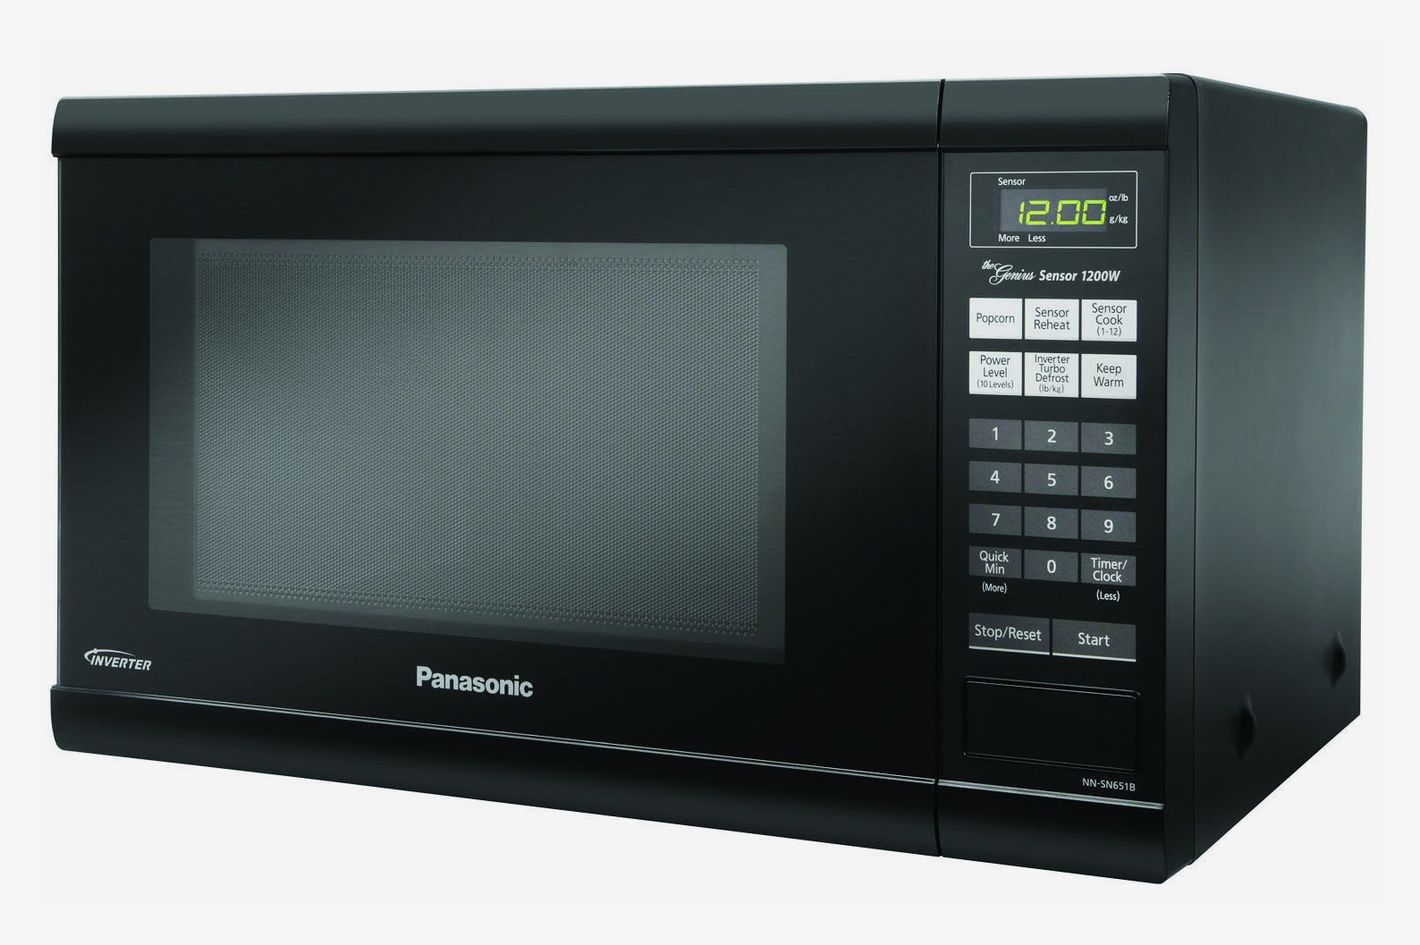 10 Best Microwave Ovens and Countertop Microwaves: 2018